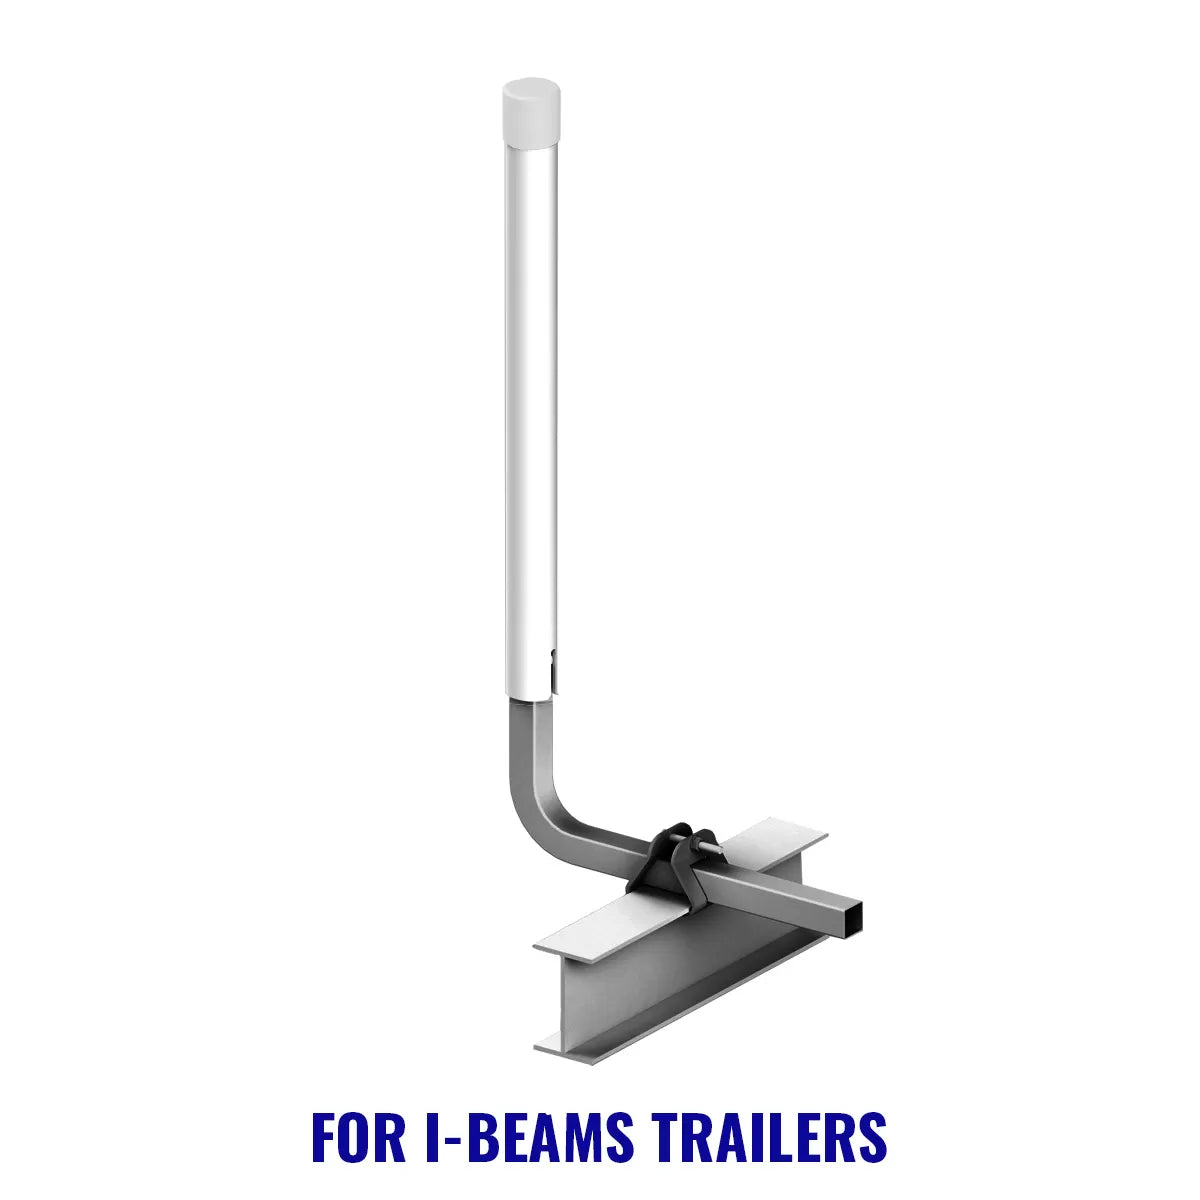 OceanSouth Trailer Guide Poles